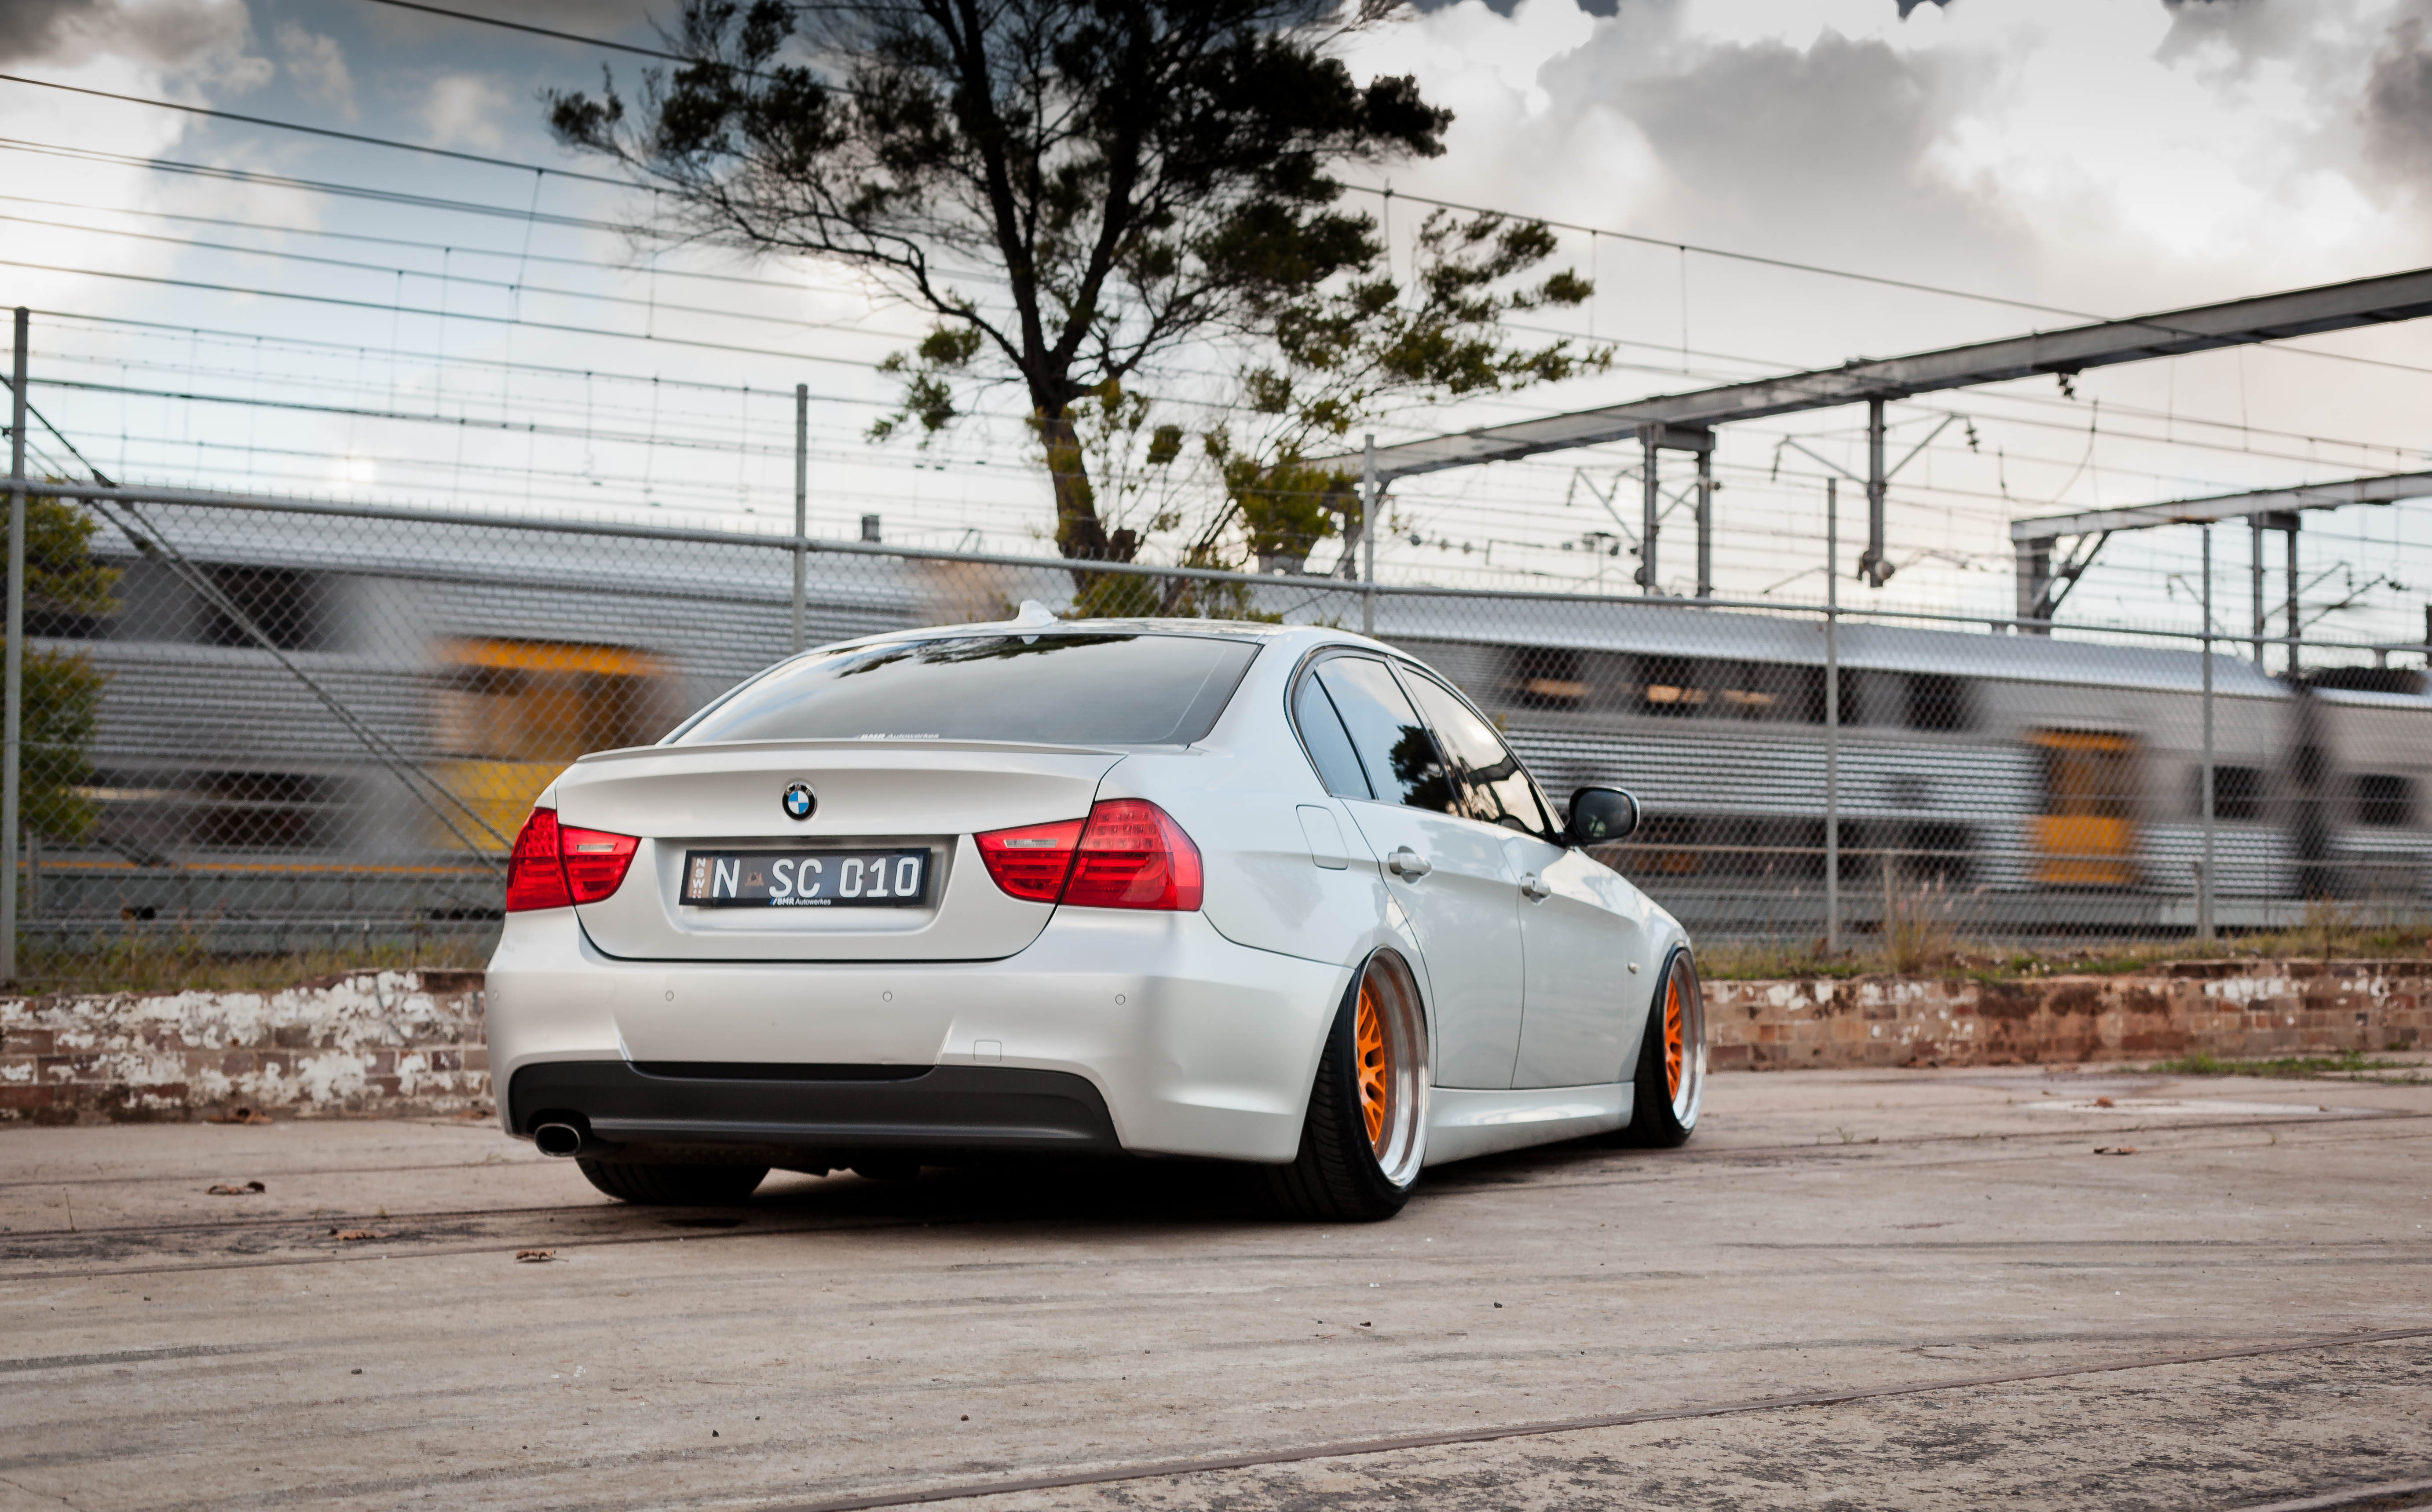 Download wallpaper BMW, BMW, grey, tuning, E90, The 3 series, 320d, section  bmw in resolution 5529x3438